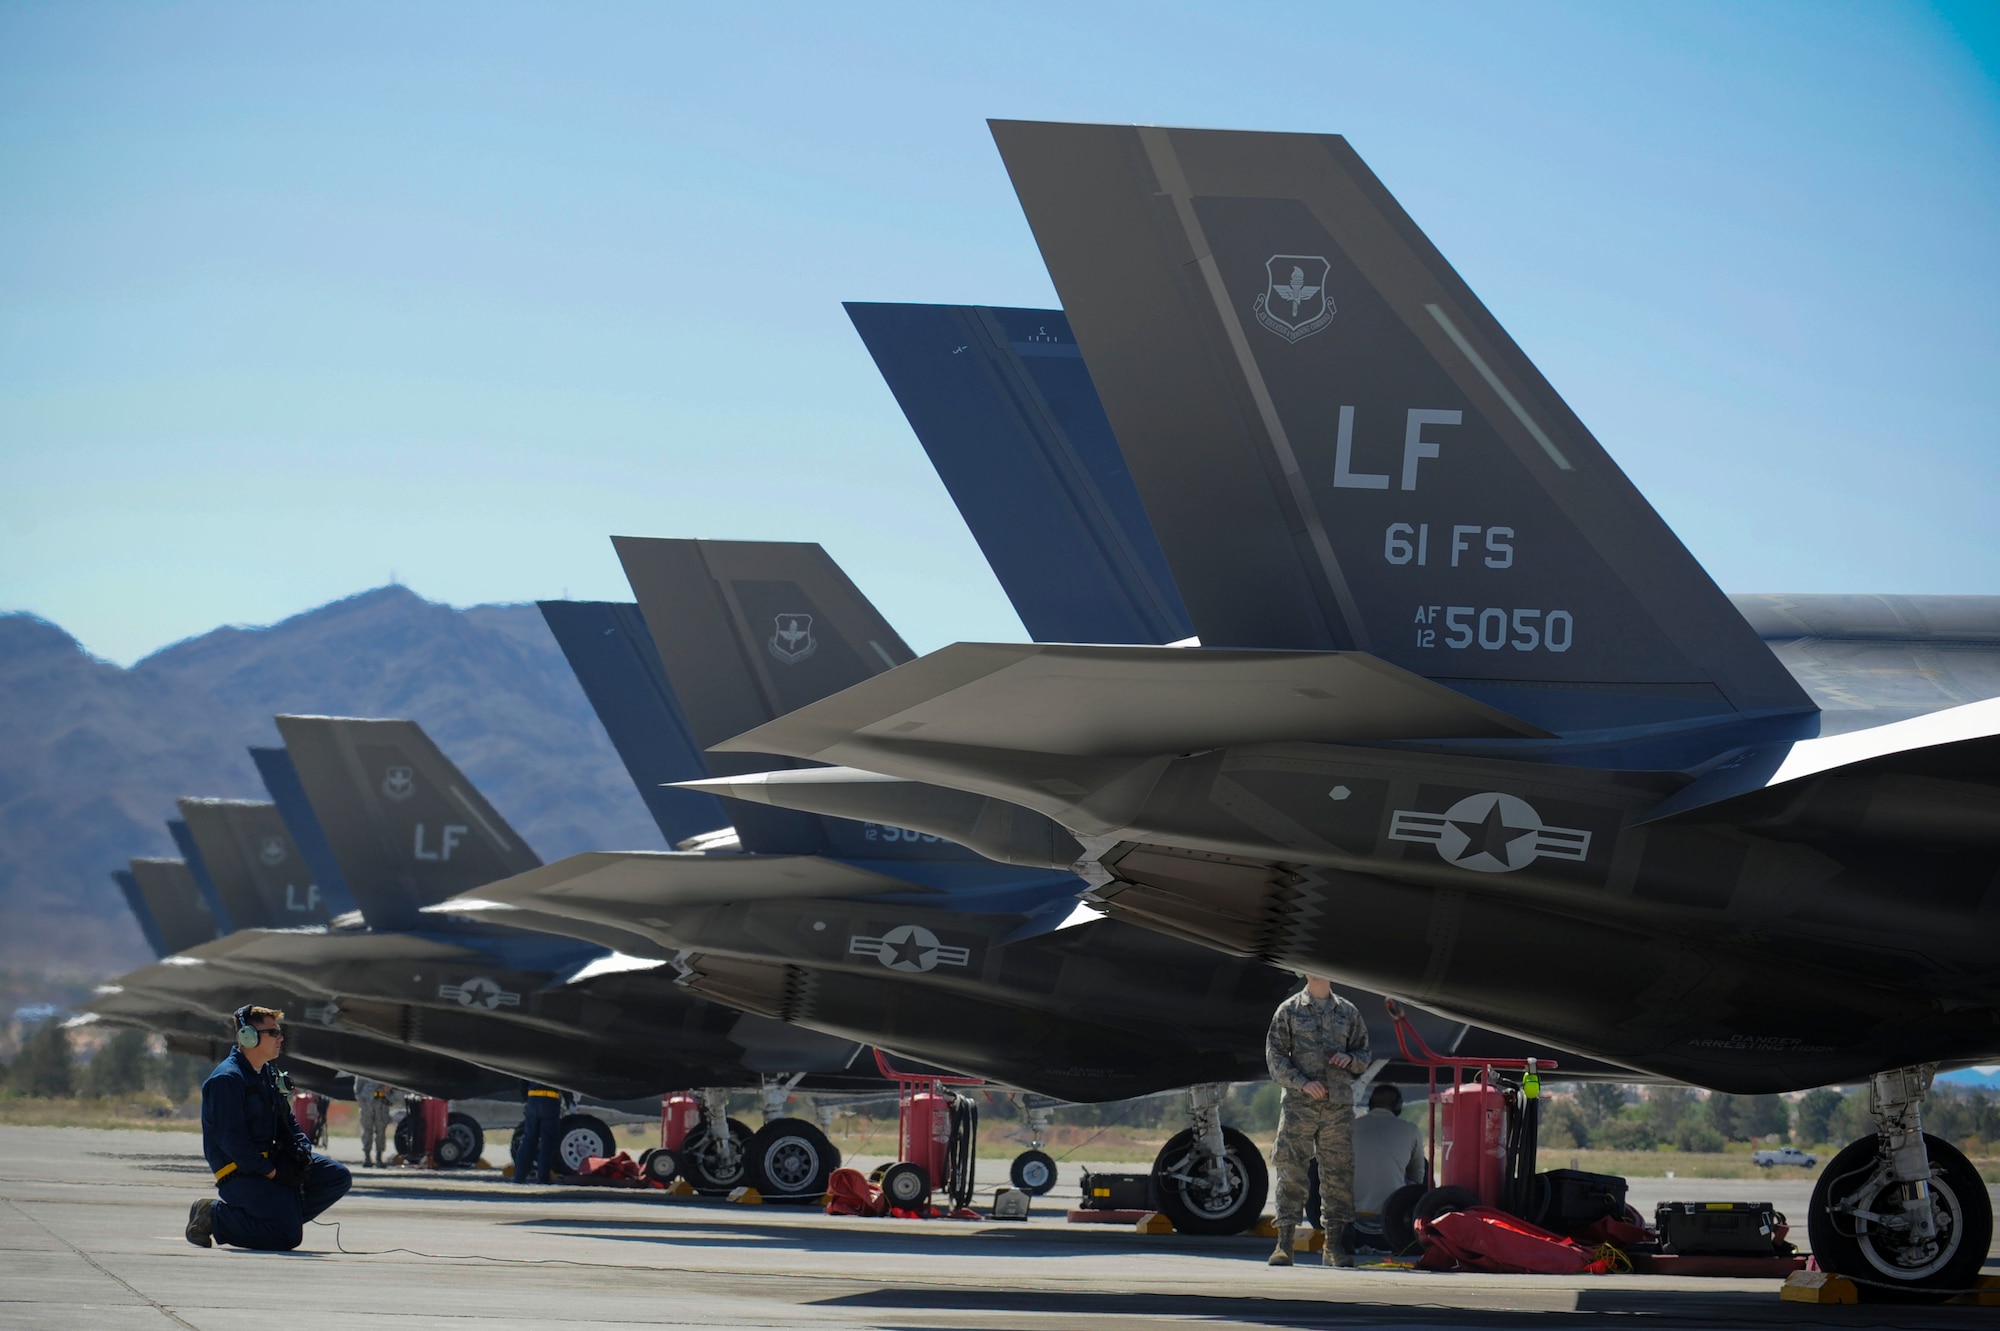 Staff Sgt. Michael Ensminger, 61st Aircraft Maintenance Unit Staff F-35 dedicated crew chief inspects one of Luke Air Force Base, Arizona F-35s sent to Nellis Air Force Base, Nevada for the training deployment April 15, 2015. (U.S. Air Force photo by Staff Sgt. Darlene Seltmann)